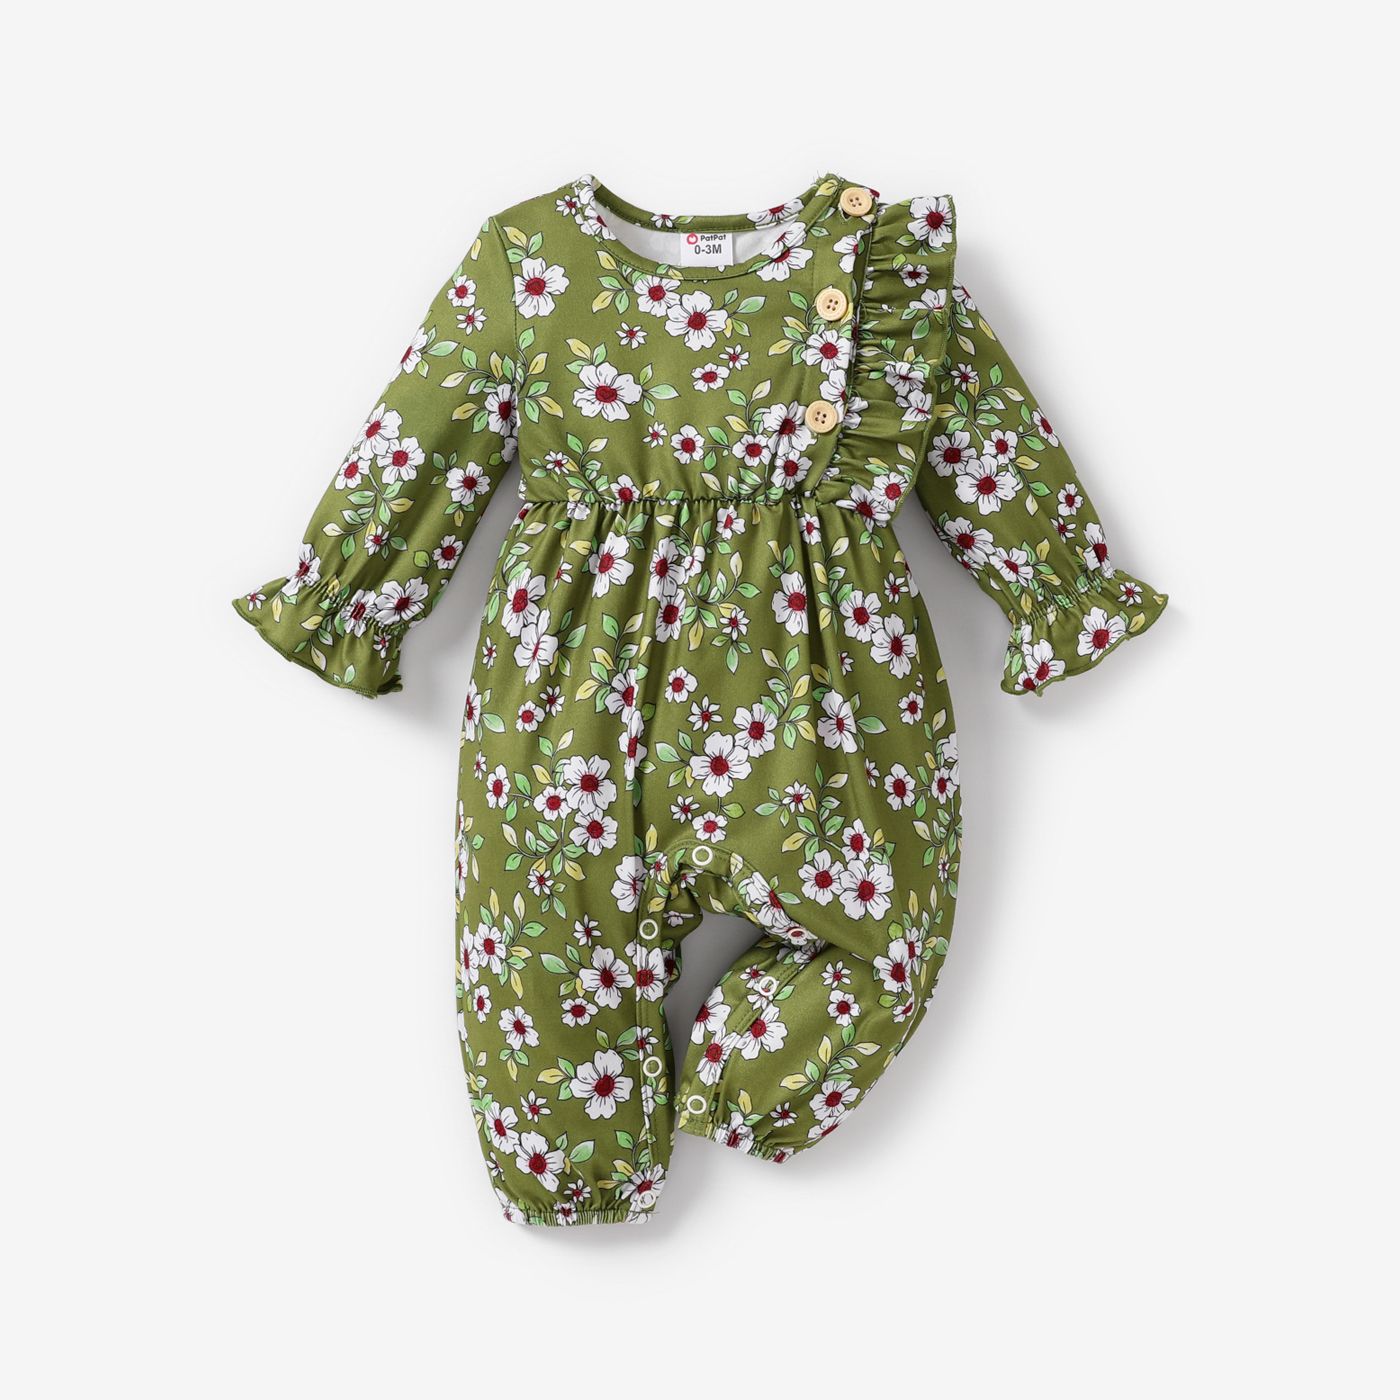 BABY GIRL Sweet Butterfly/Solid color/Floral print Jumpsuit, Soft Ruffle Edge, 1 Piece, Medium Thick